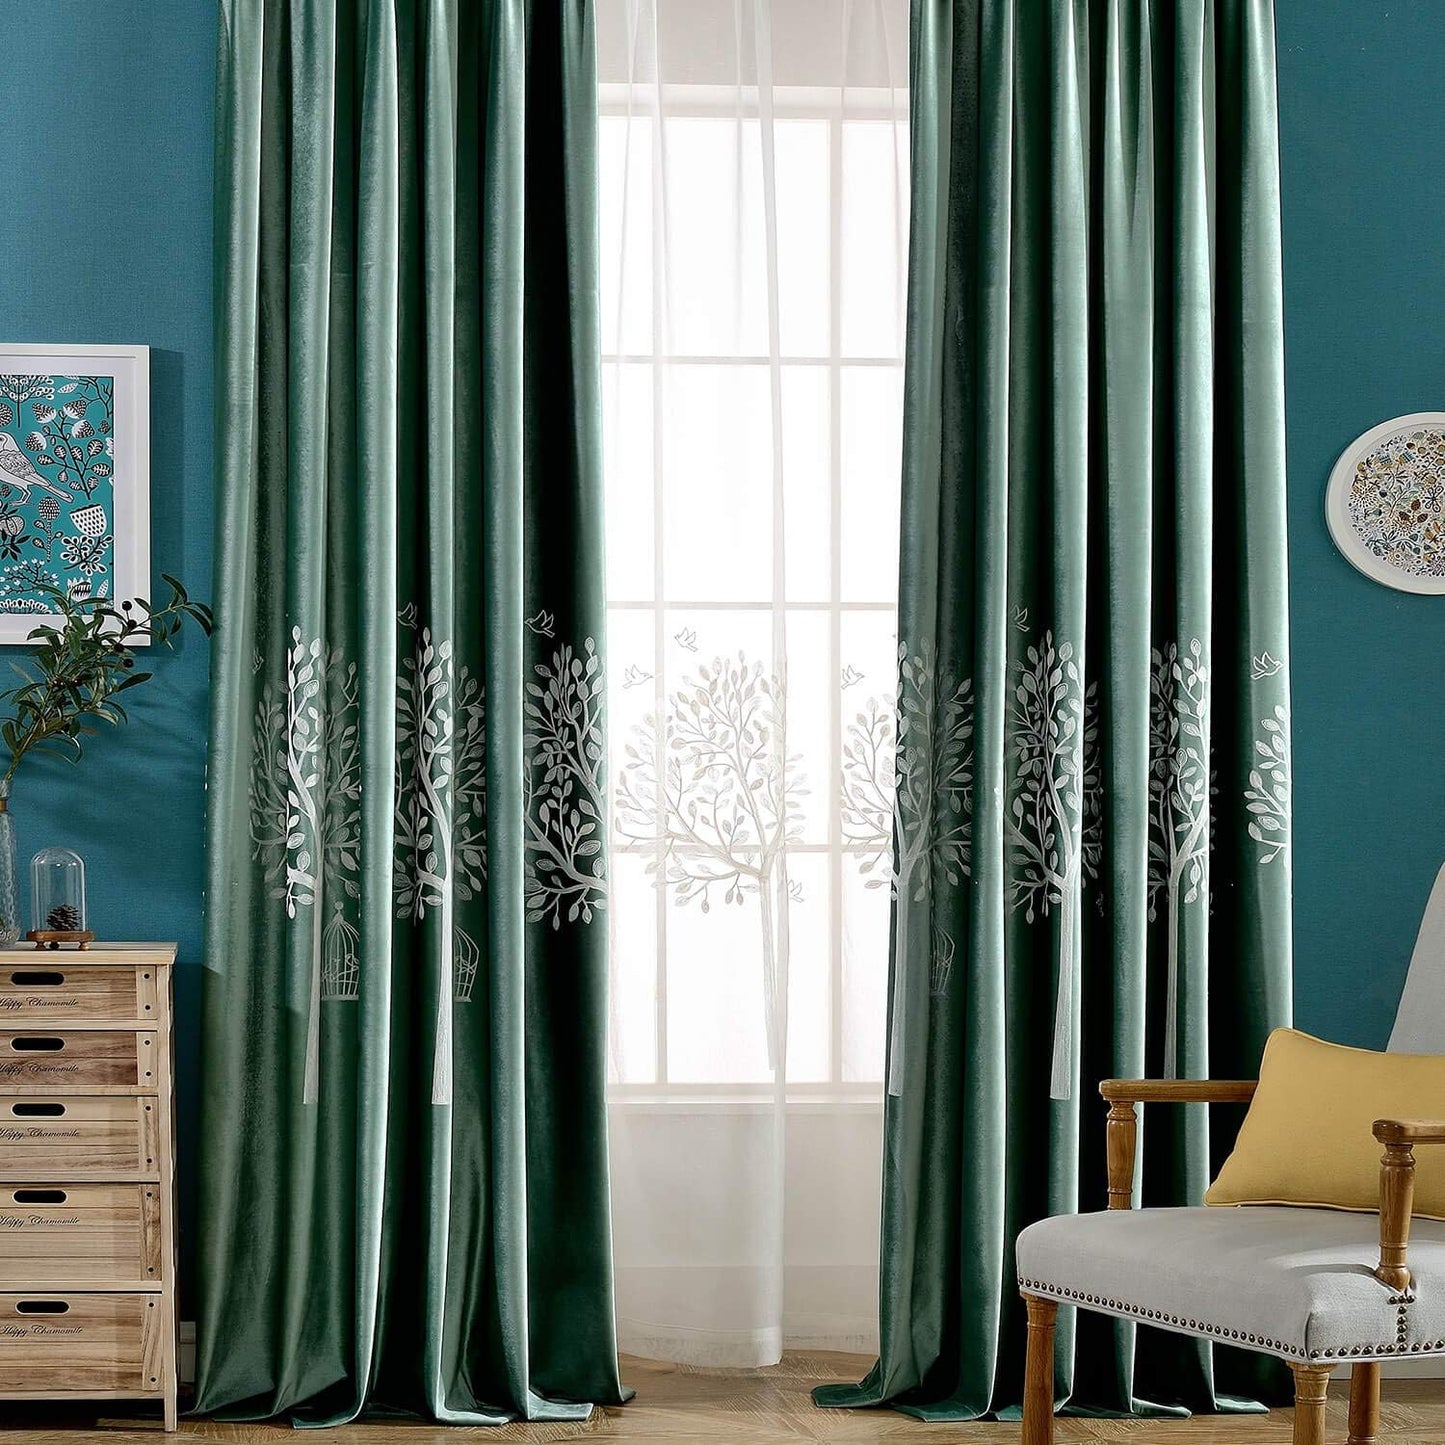 VOGOL Sheer Curtains 84 Inches Long, Trees Embroidered White Sheer Window Curtain for Living Room/Dining Room, Rod Pocket, 52 X 84, 2 Panels  YouYee Tree-Green W60Xl106 